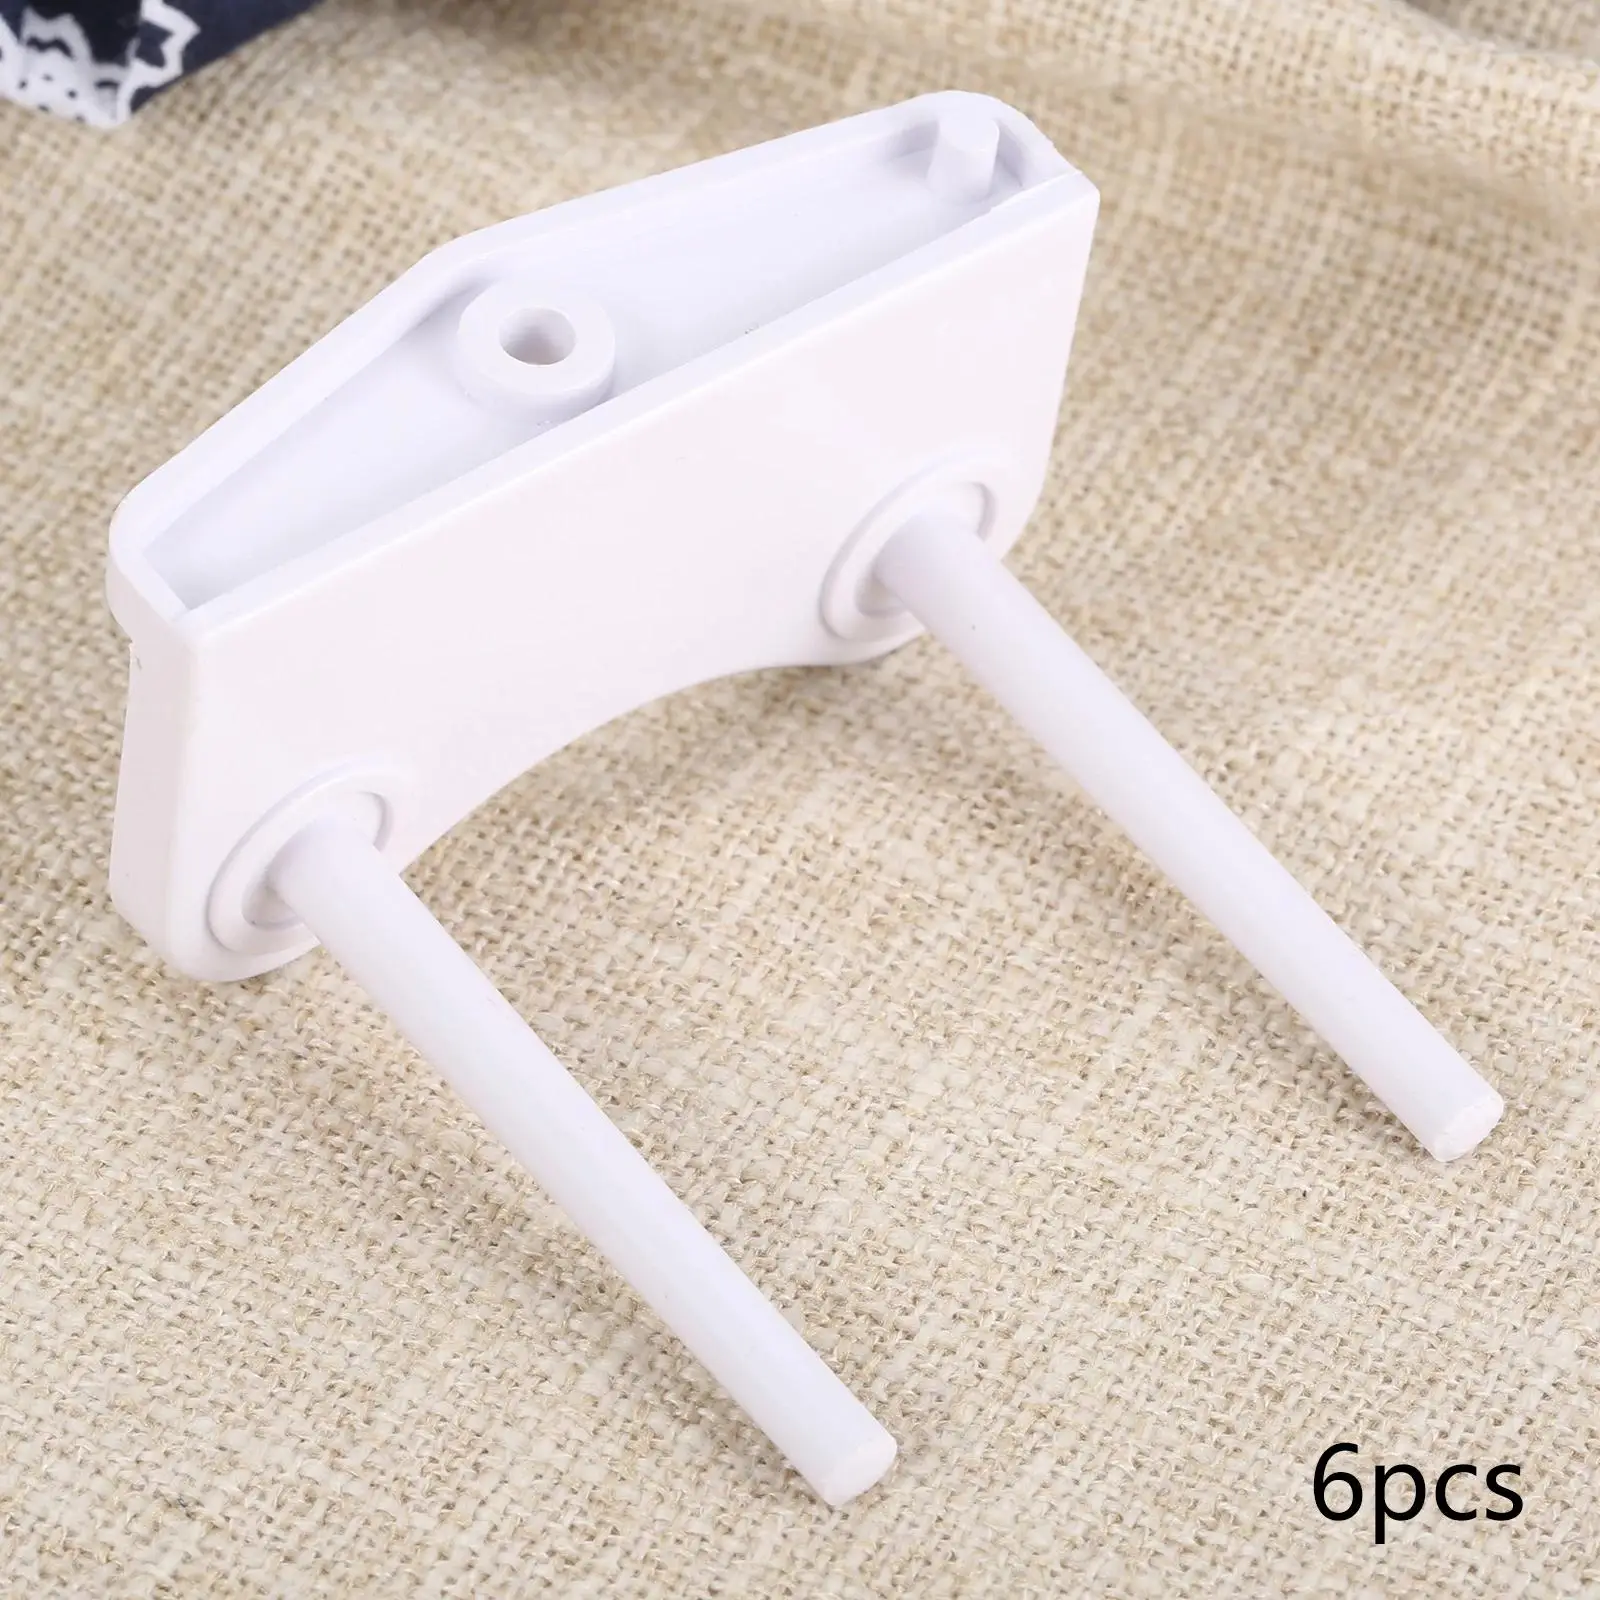 2 Thread Spool Holder, Embroidery Sewing Quilting Machine Thread Stand Rack for Household Domestic Sewing Machine